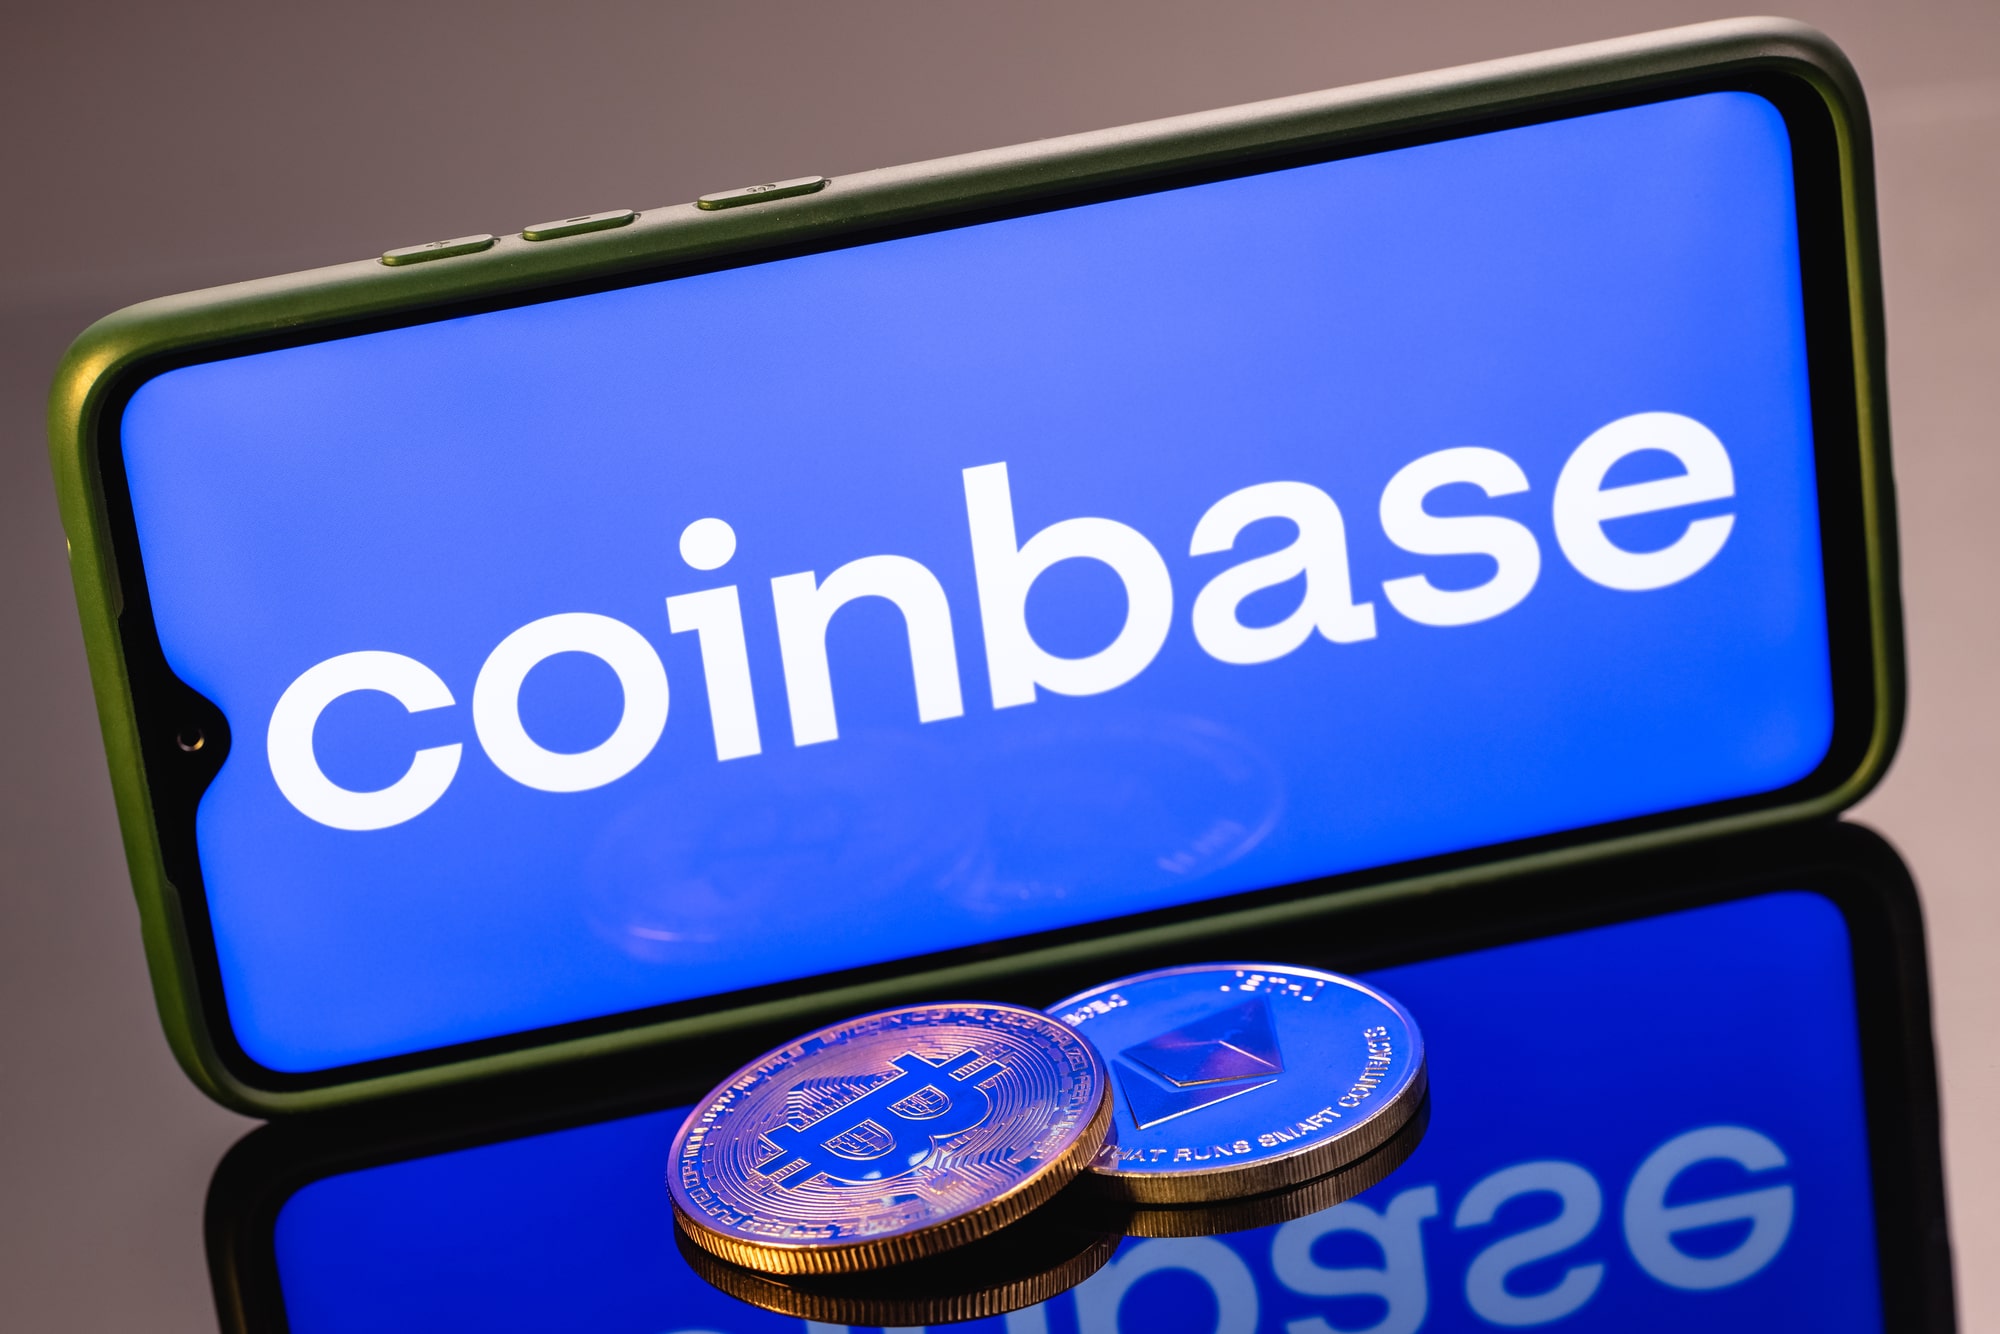 Ethereum volume tops Bitcoin on Coinbase, while DeFi, NFTs gain popularity